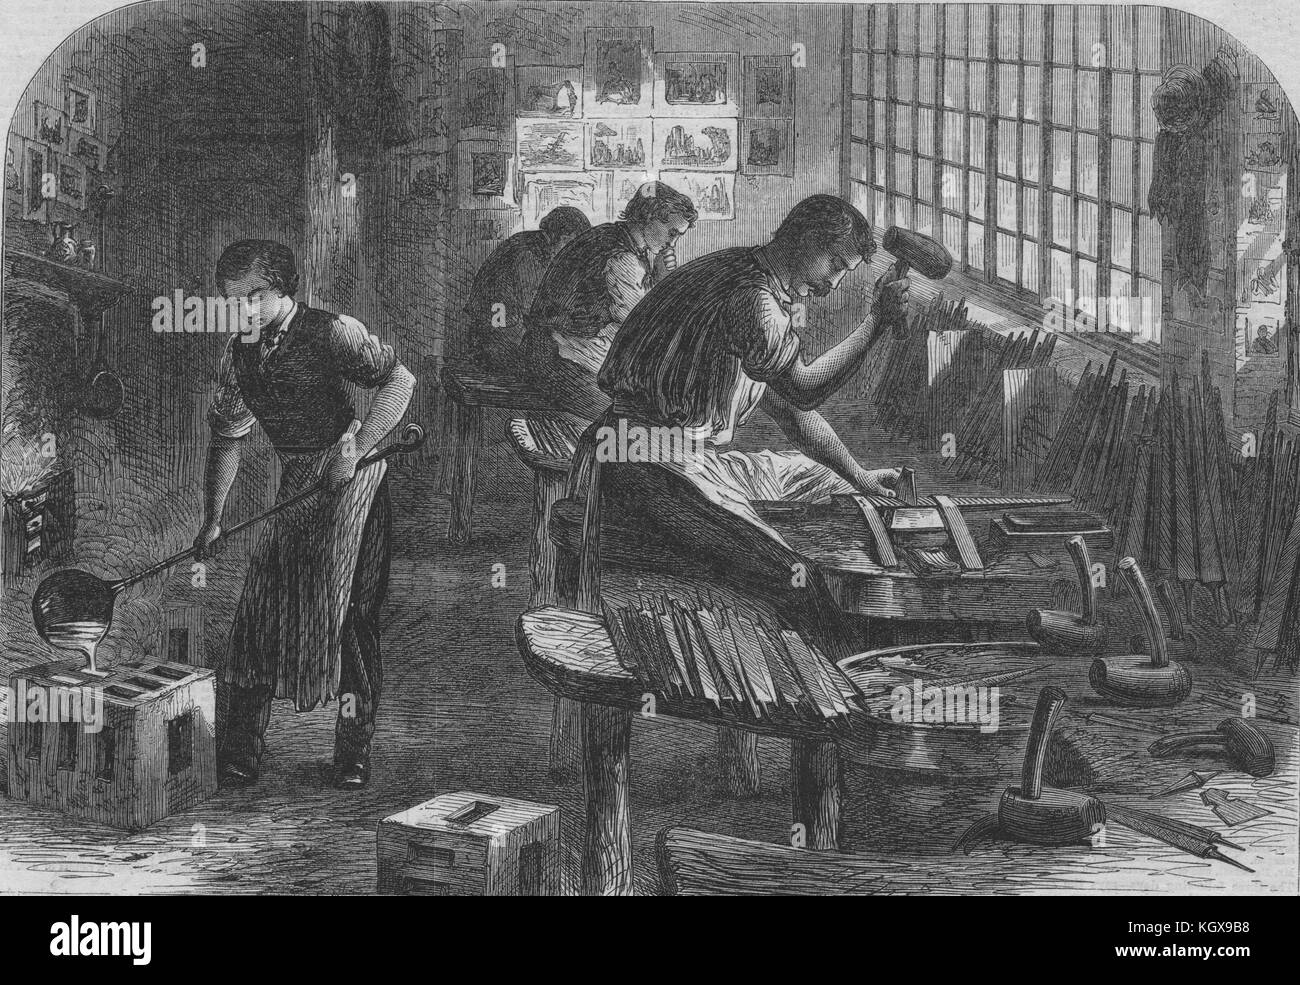 The Sheffield steel manufactures. File cutting. Yorkshire 1866. The Illustrated London News Stock Photo